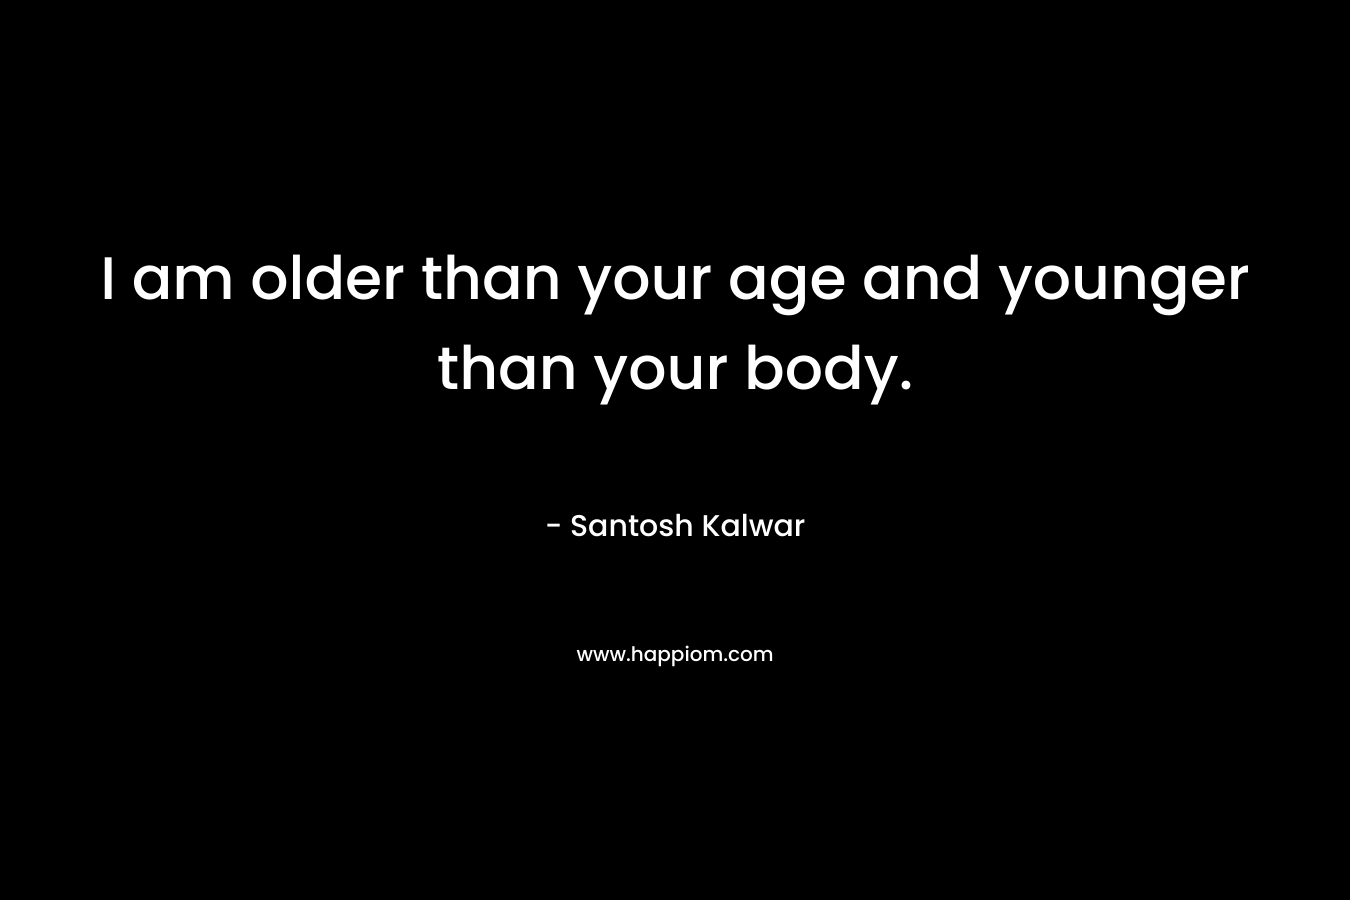 I am older than your age and younger than your body.